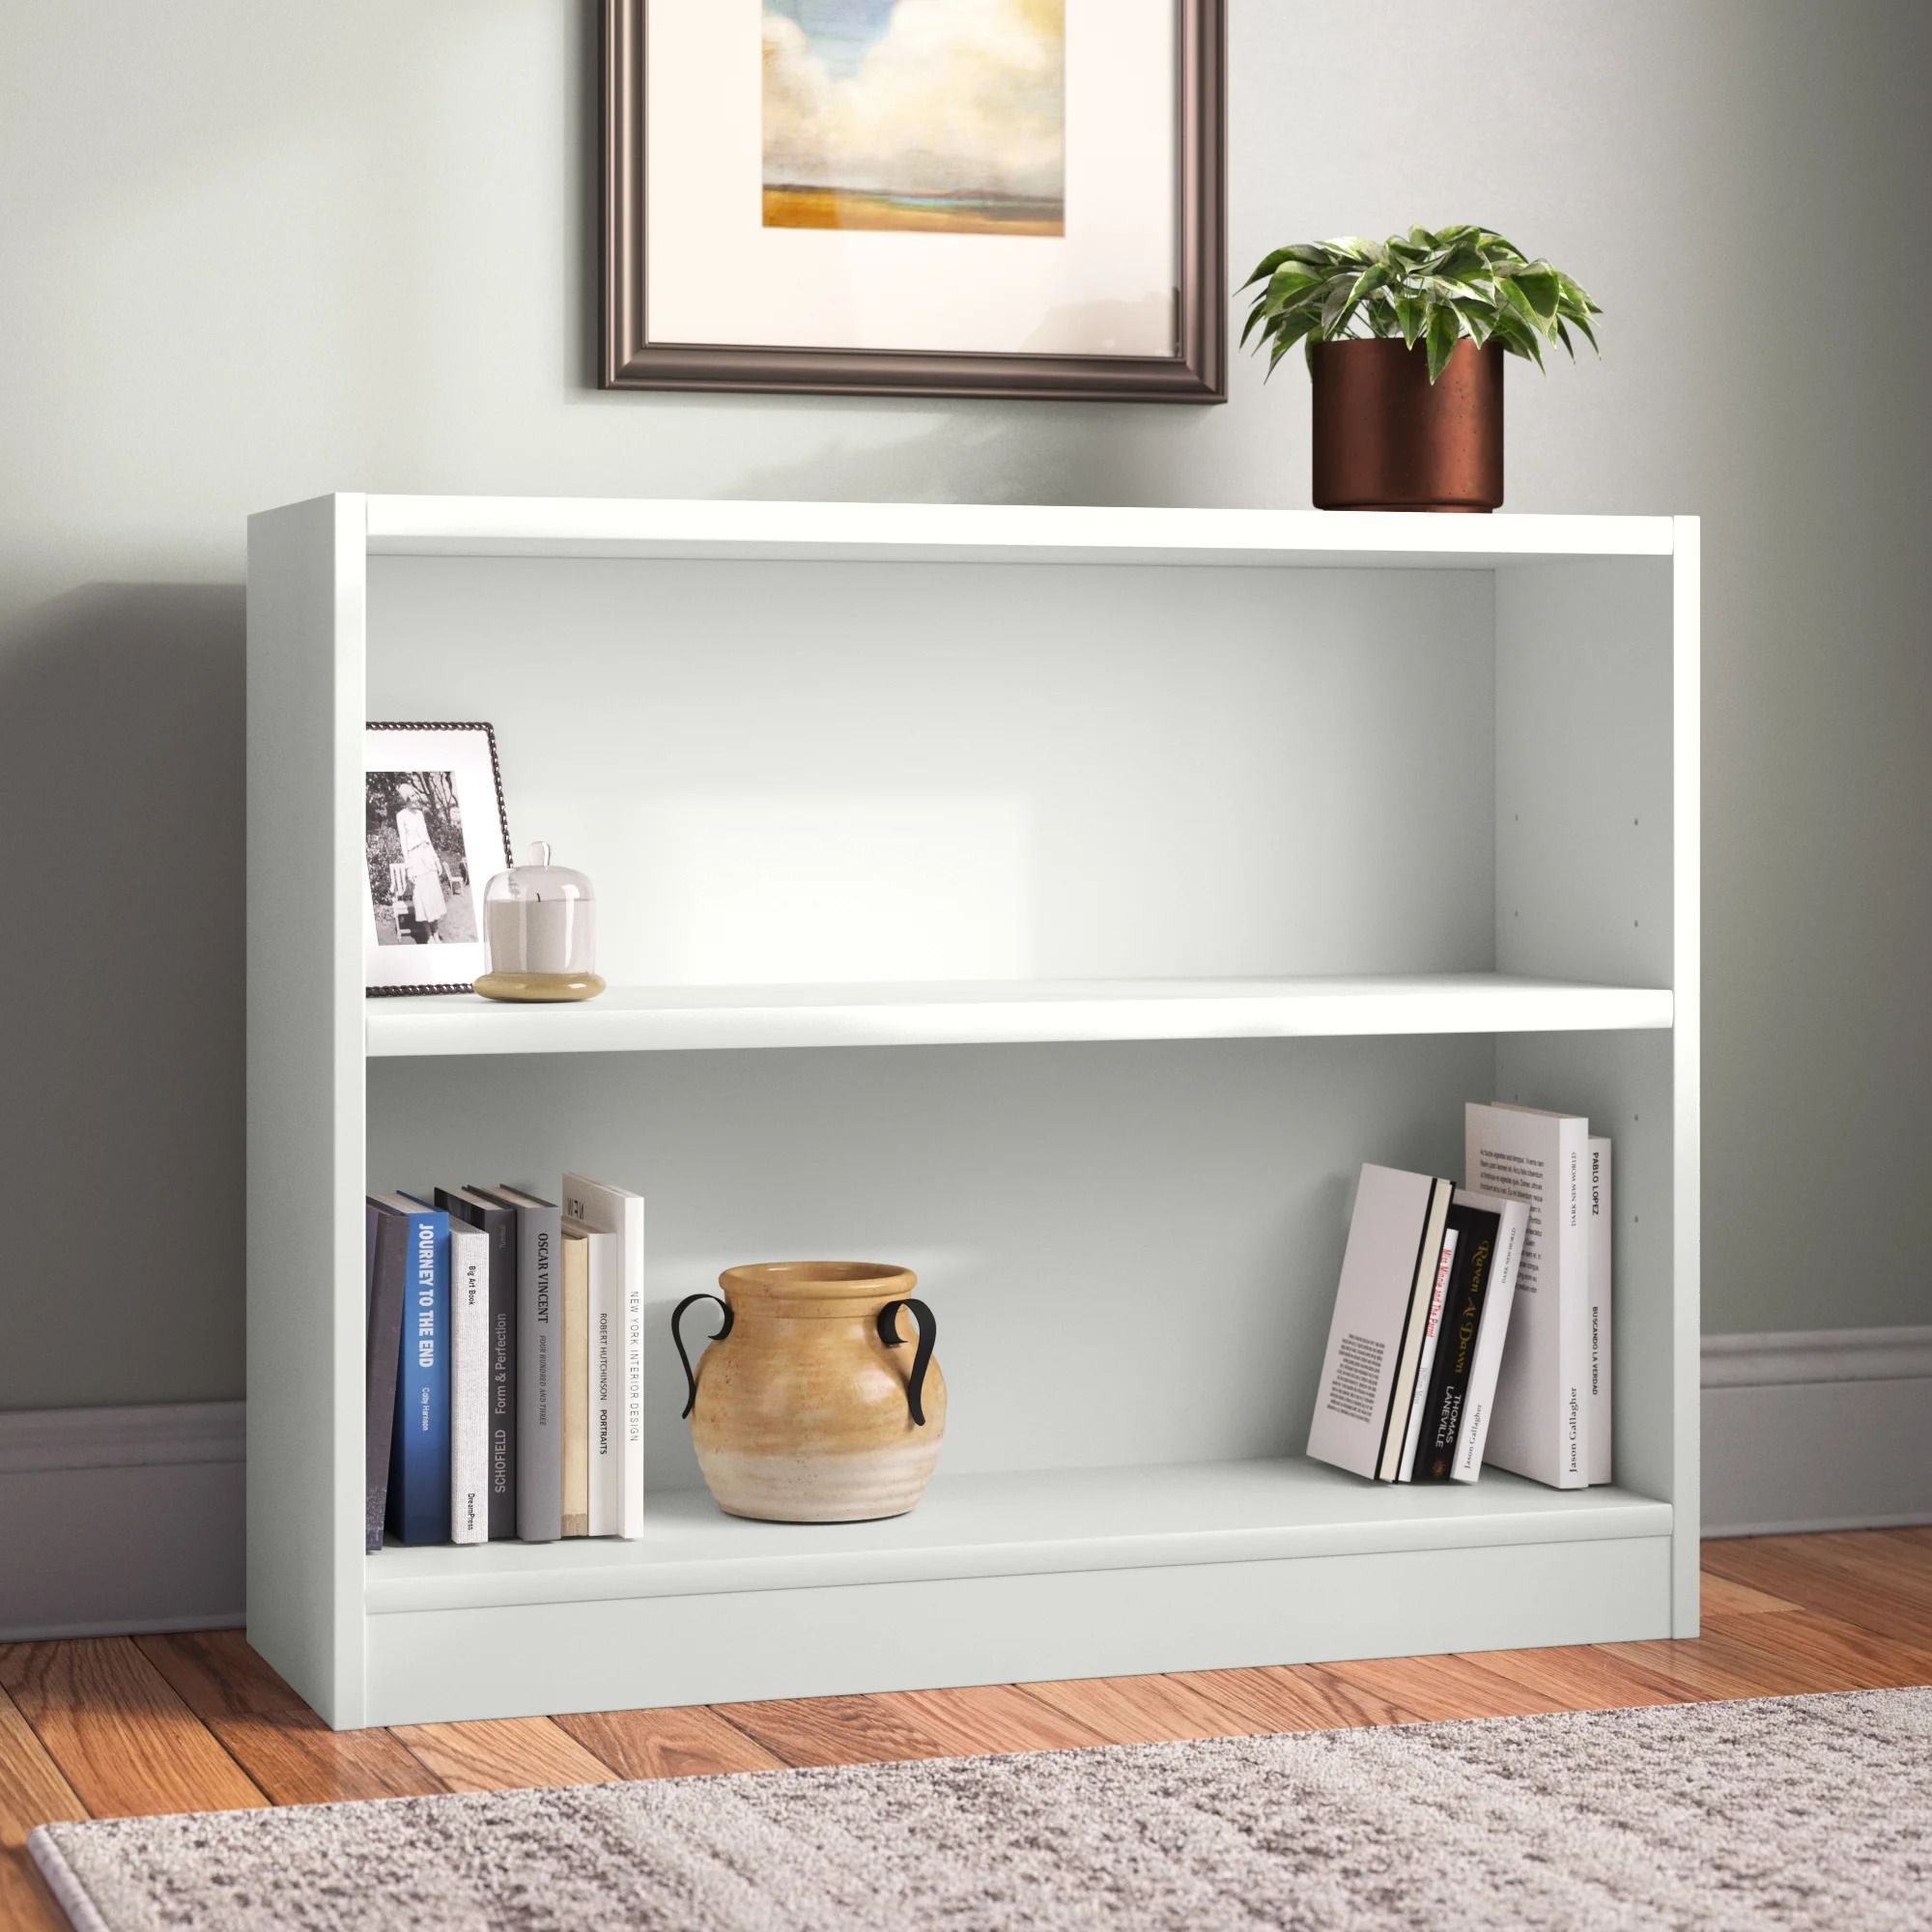 10 Best Wooden Bookcases In 2023 – Wooden Bookshelves For Your Home Throughout 30 Inch Bookcases (View 14 of 15)